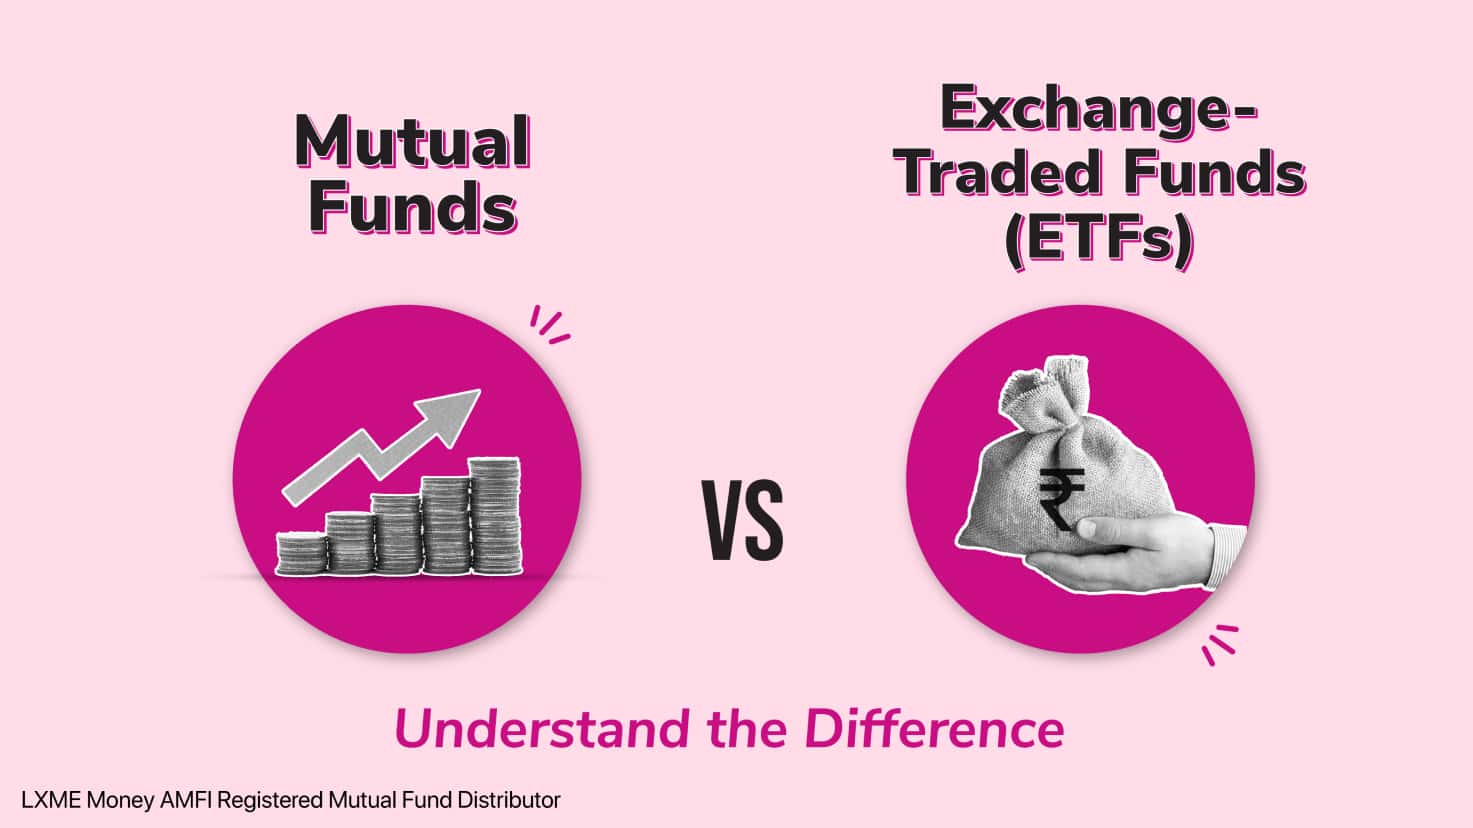 Mutual Funds vs. Exchange-Traded Funds (ETFs): Understand the Difference